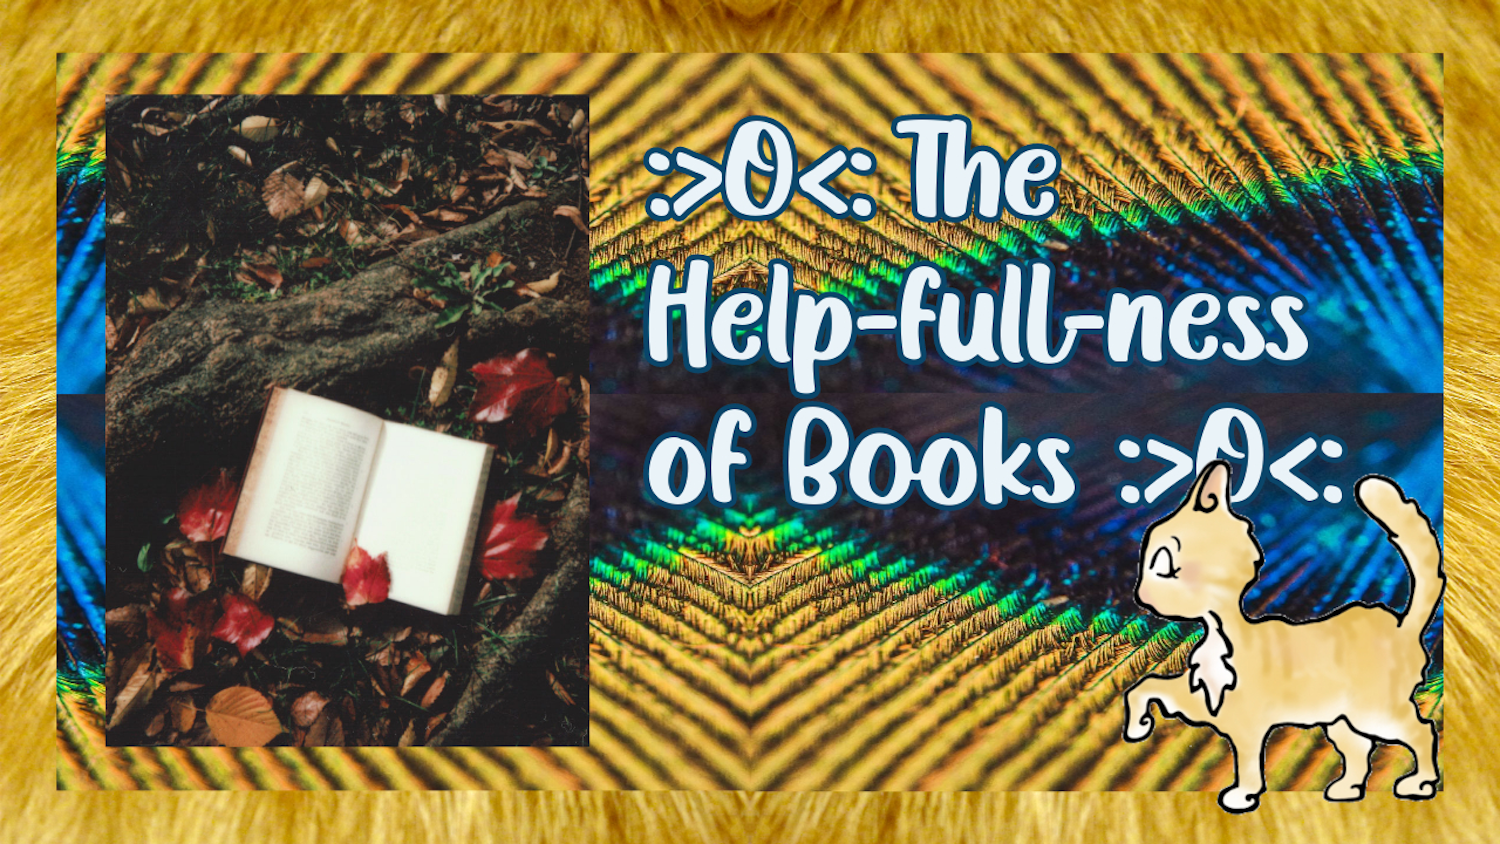 The Help-full-ness of Books, a blog post by Birdy Diamond :>O<: